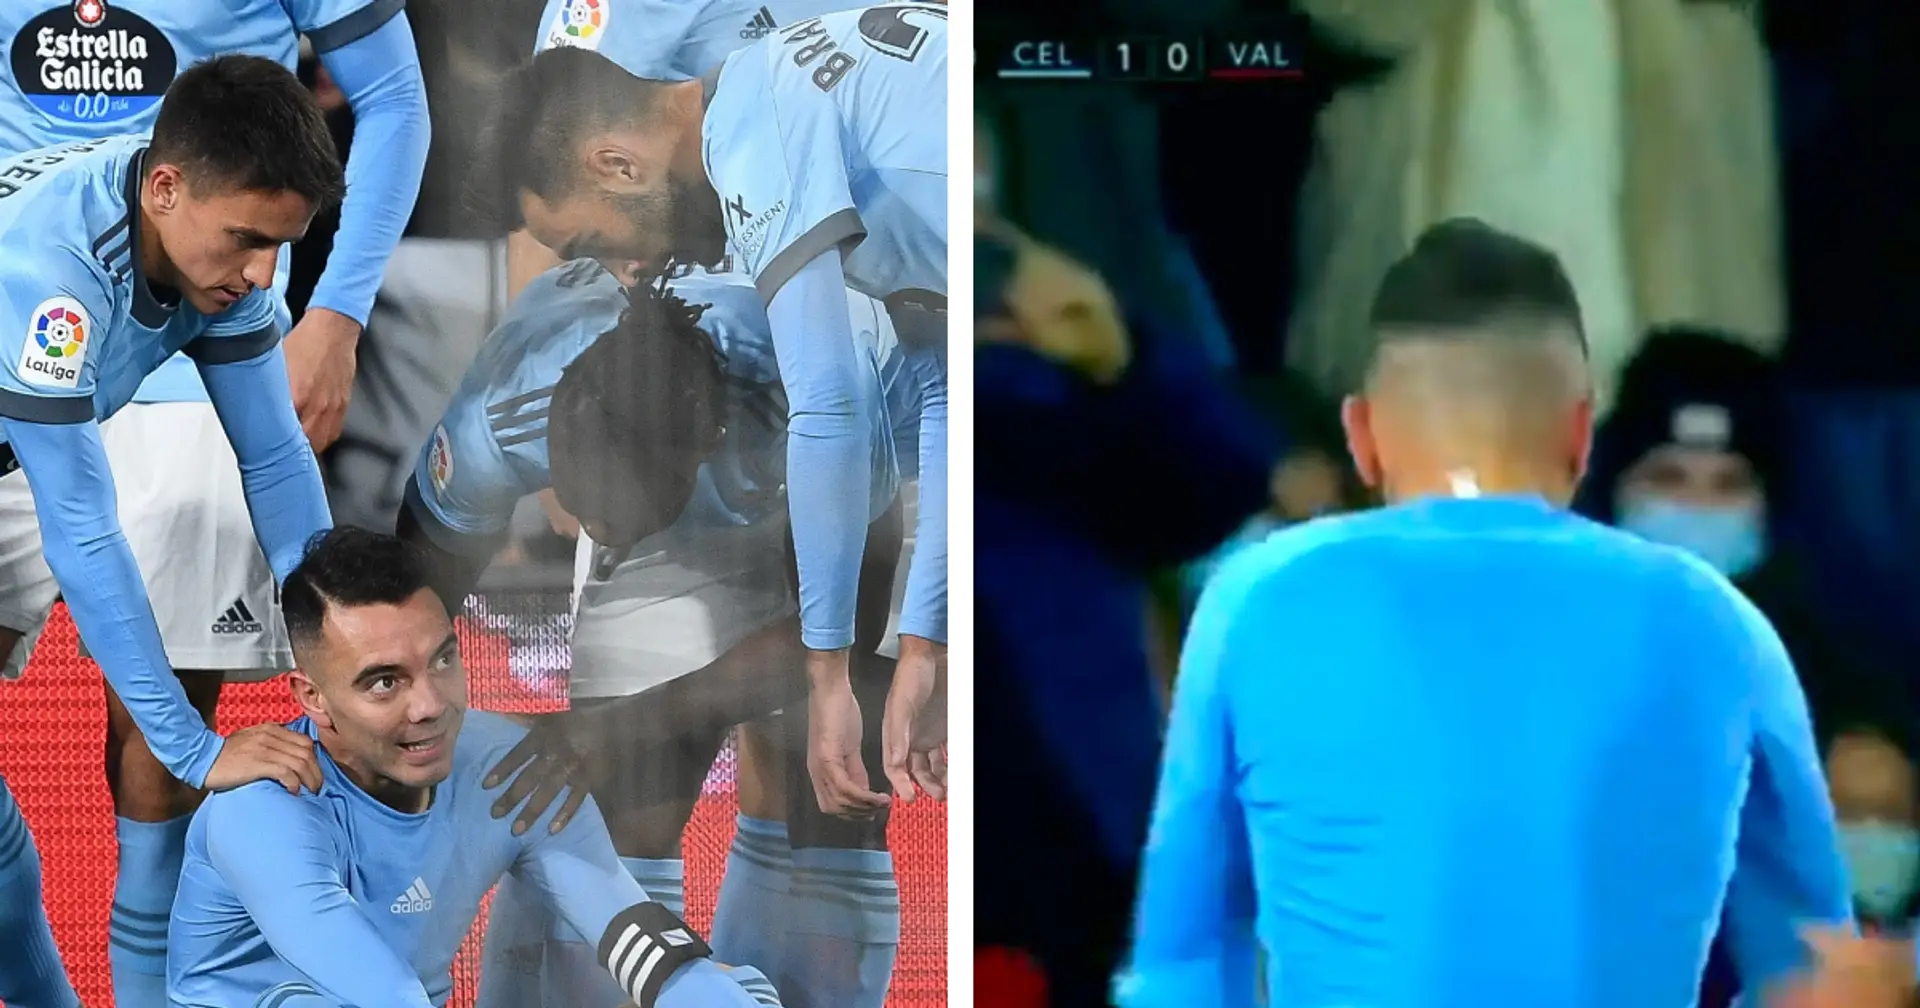 Iago Aspas hacks the system by receiving yellow card on purpose in La Liga game